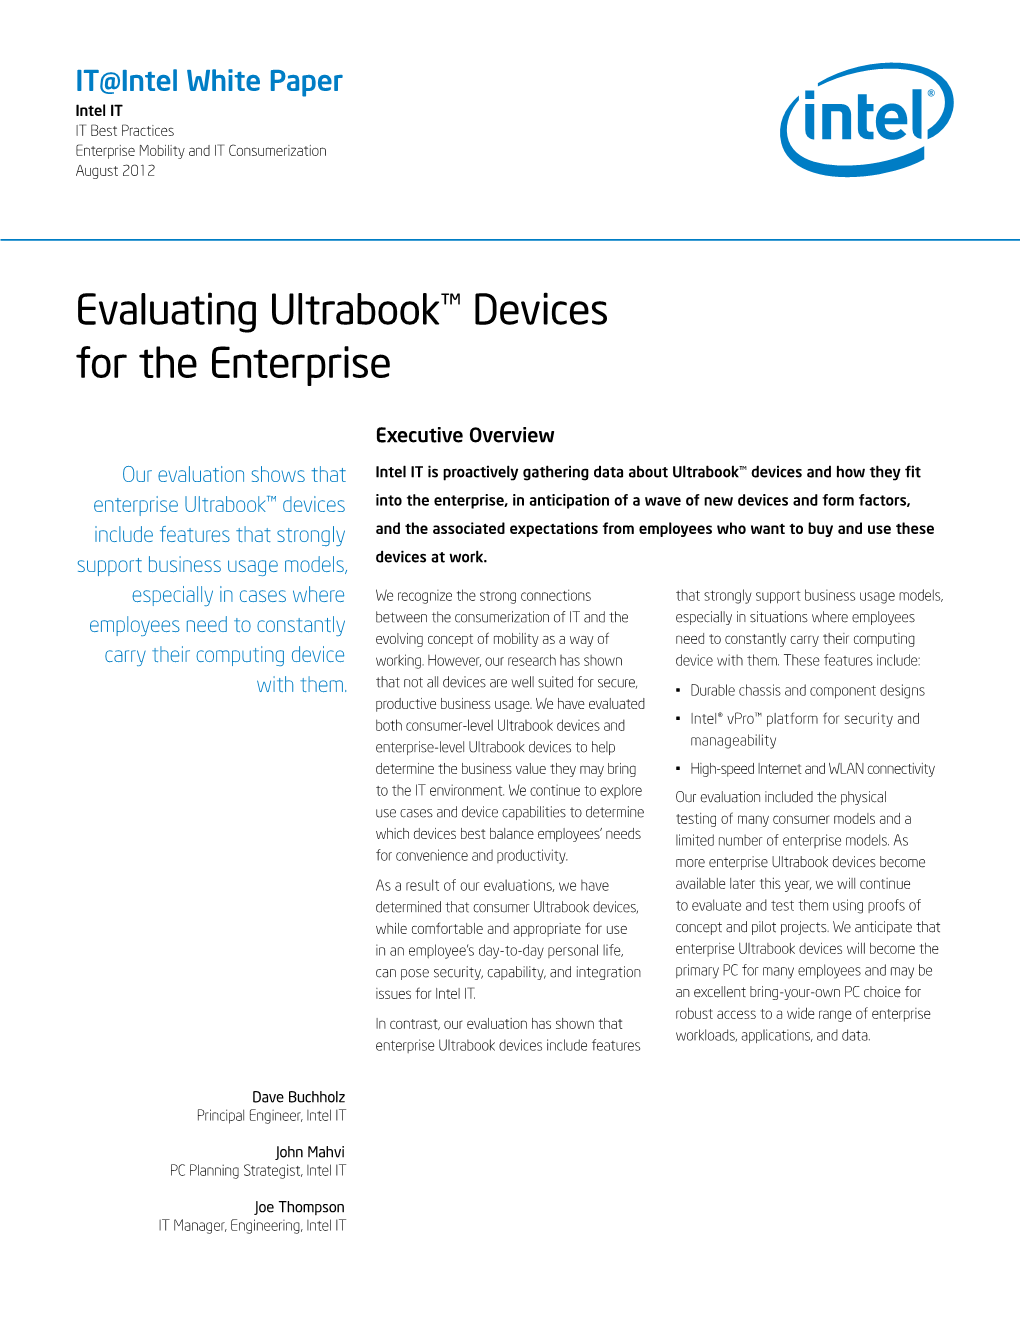 Evaluating Ultrabook™ Devices for the Enterprise